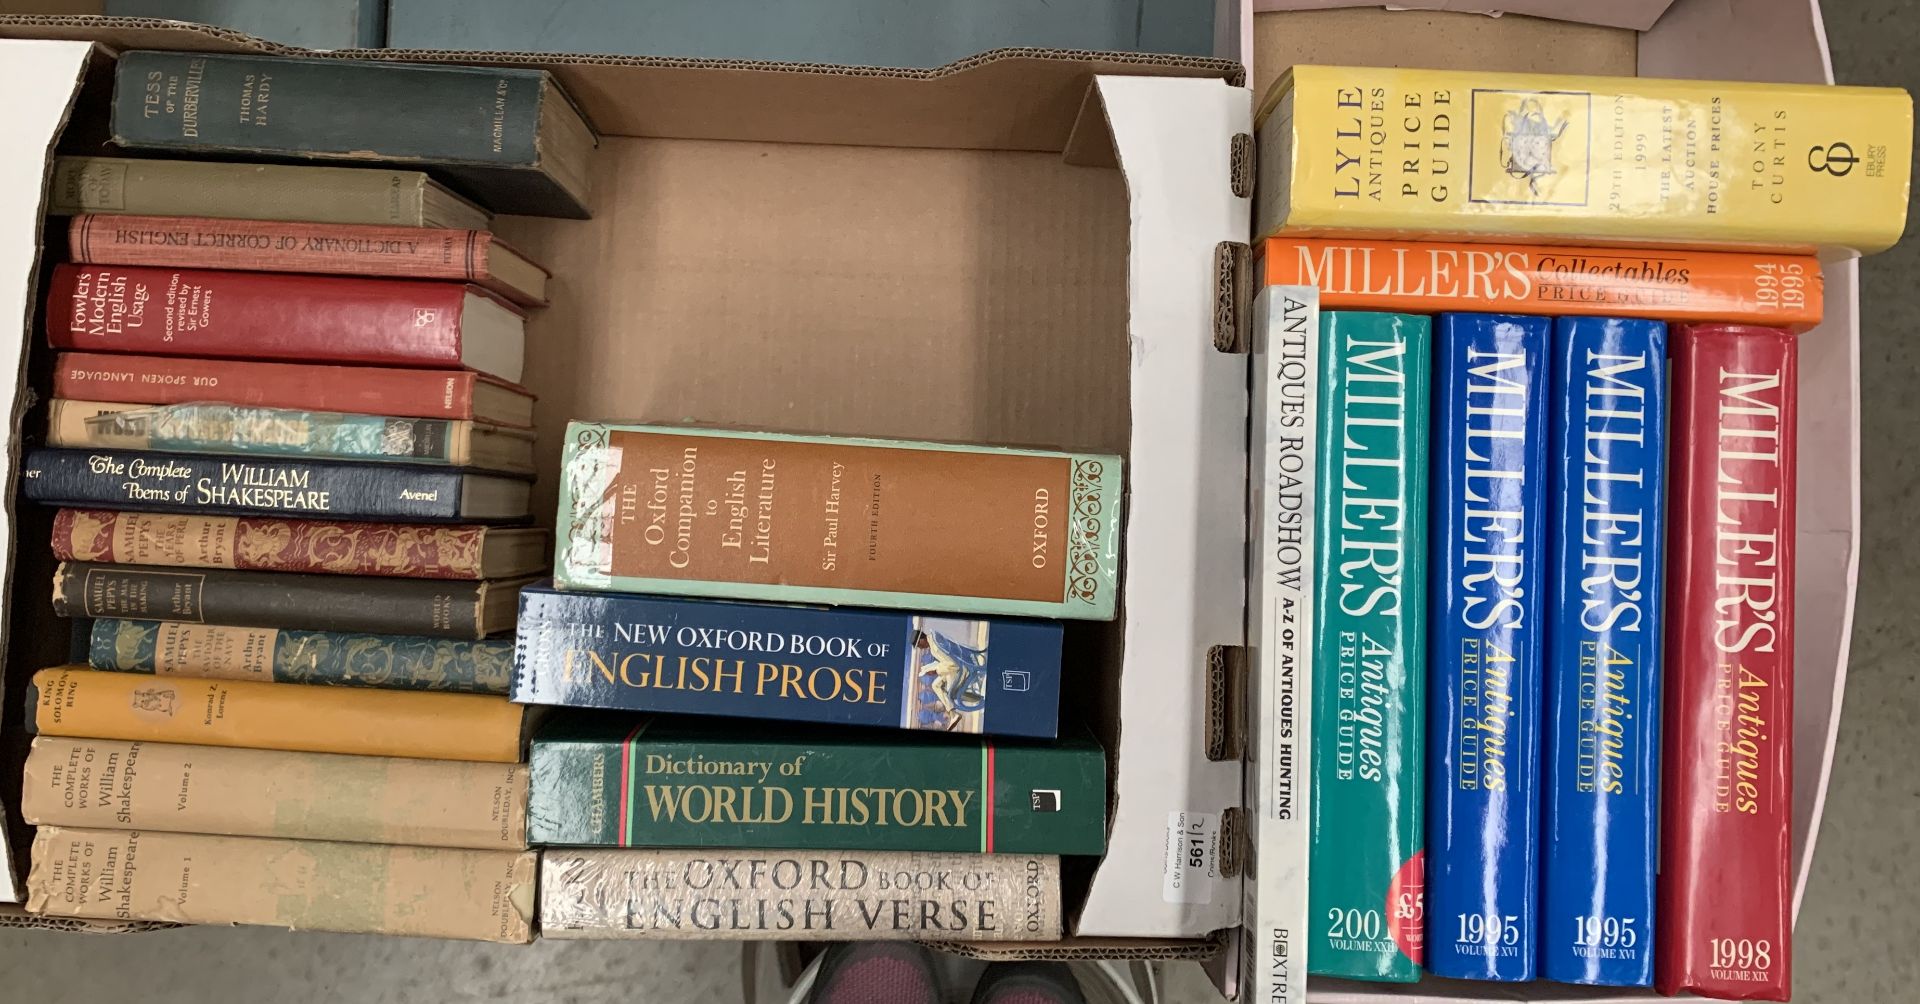 Contents to two boxes, books on literature, Shakespeare, English Prose,